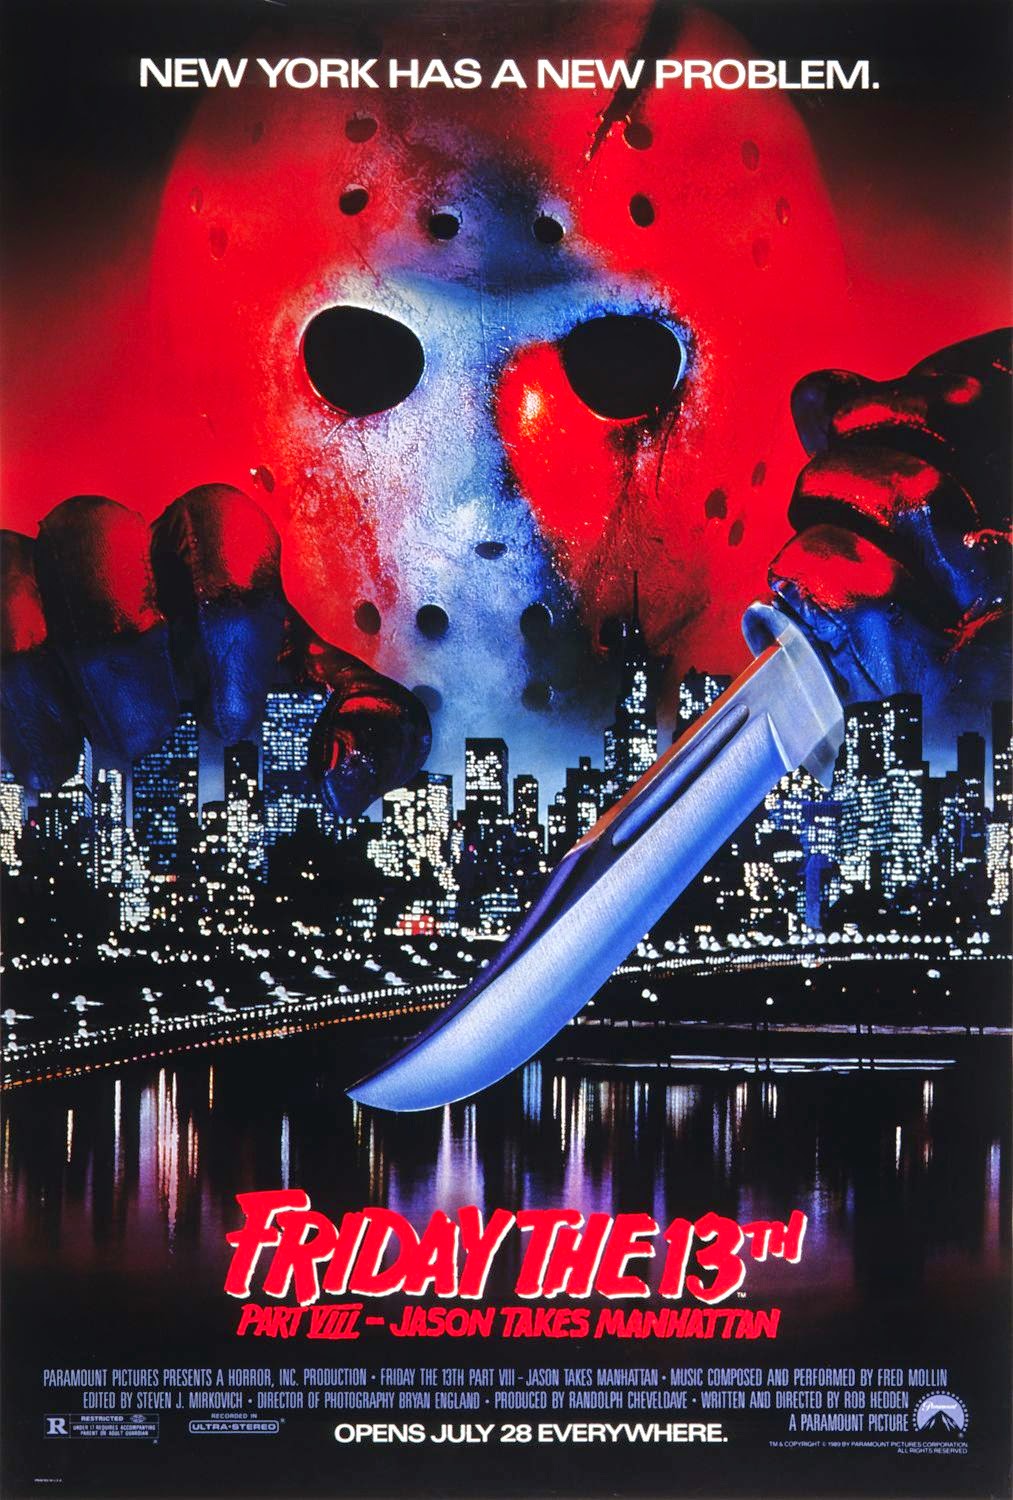 The History Of The Censored Posters Of Friday The 13th ...